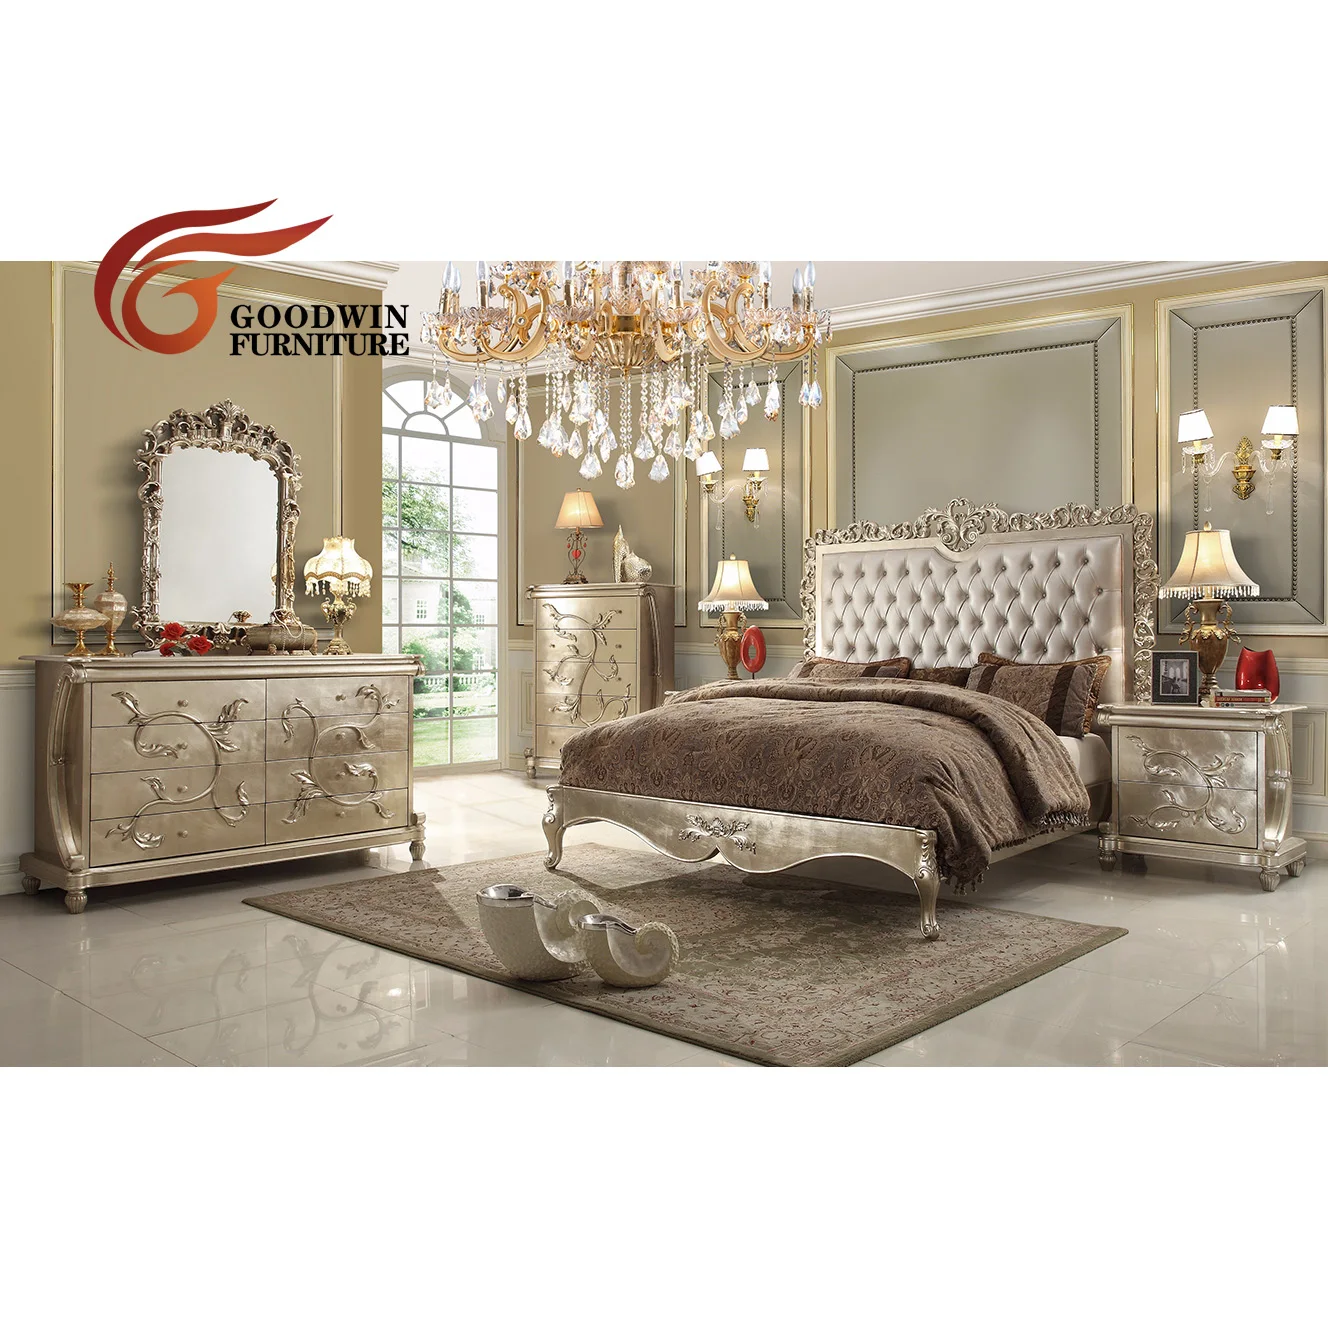 Goodwin Classic Luxury Style Solid Wood Bedroom Furniture Bed Room Set TM22B